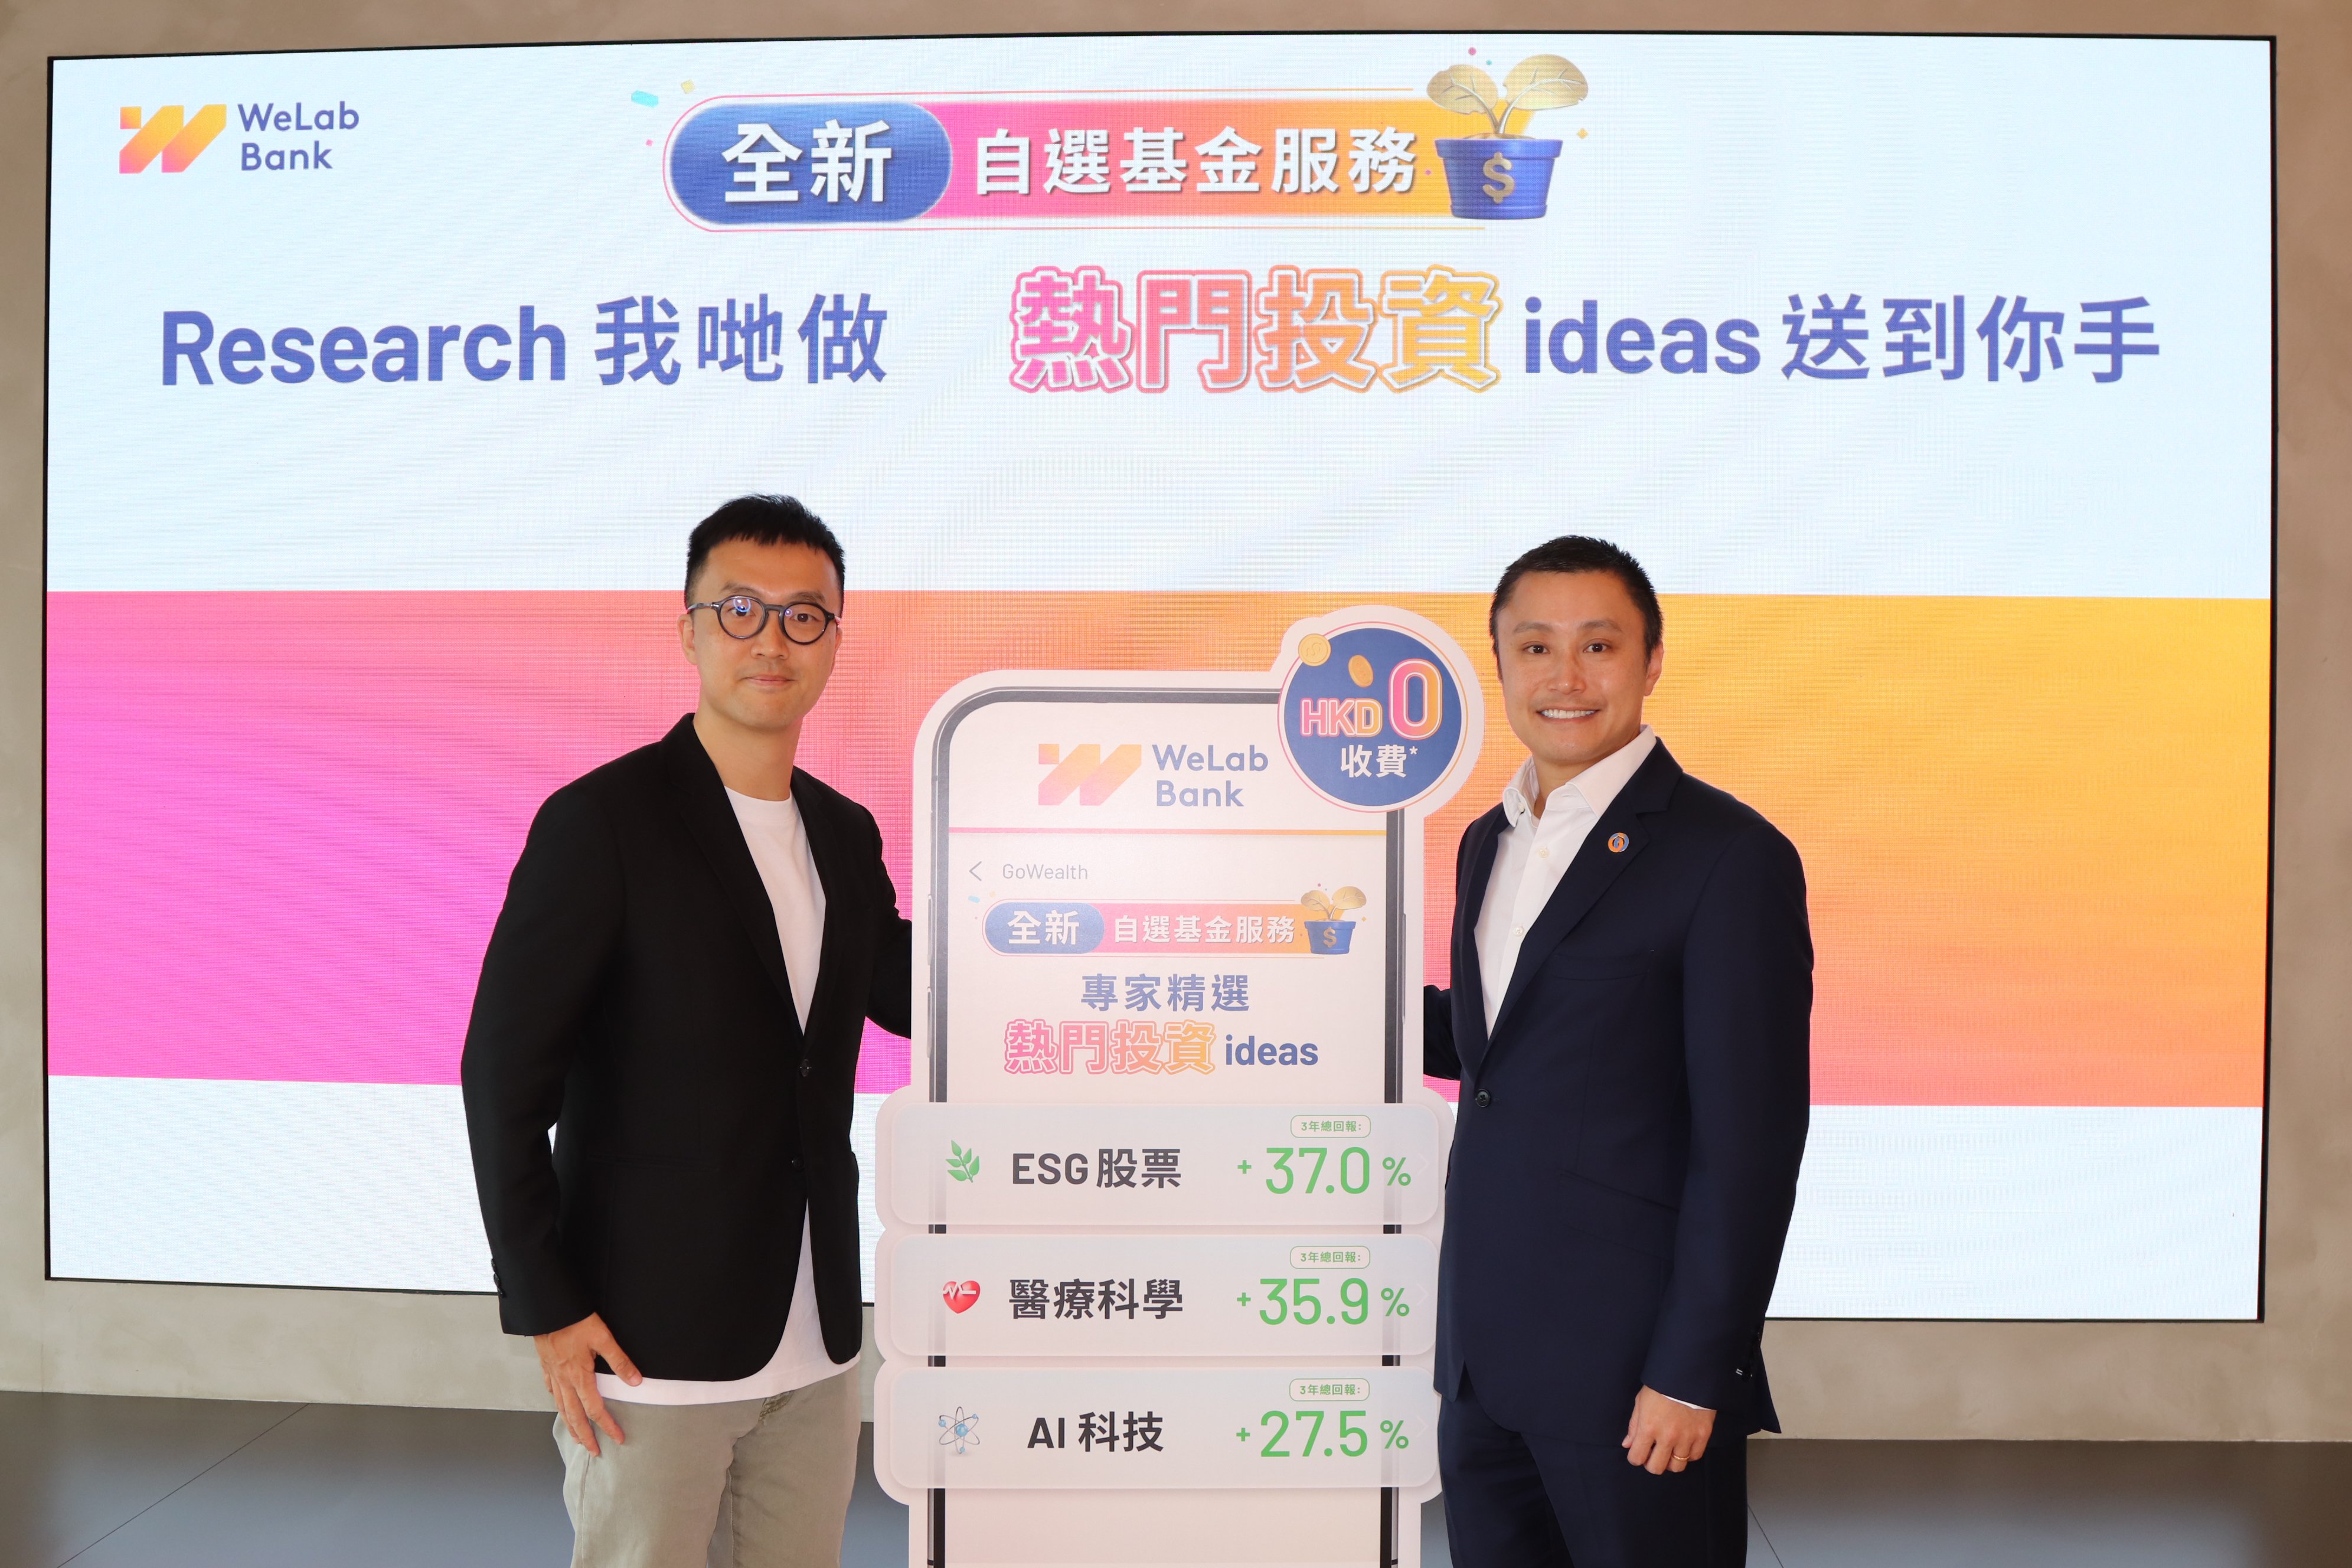 WeLab Bank Chief Executive Tat Lee (Left) and WeLab Founder & Group CEO Simon Loong (right) believe the all-new Featured Fund Platform offers a simple and direct fund trading experience that makes investment decisions easier.